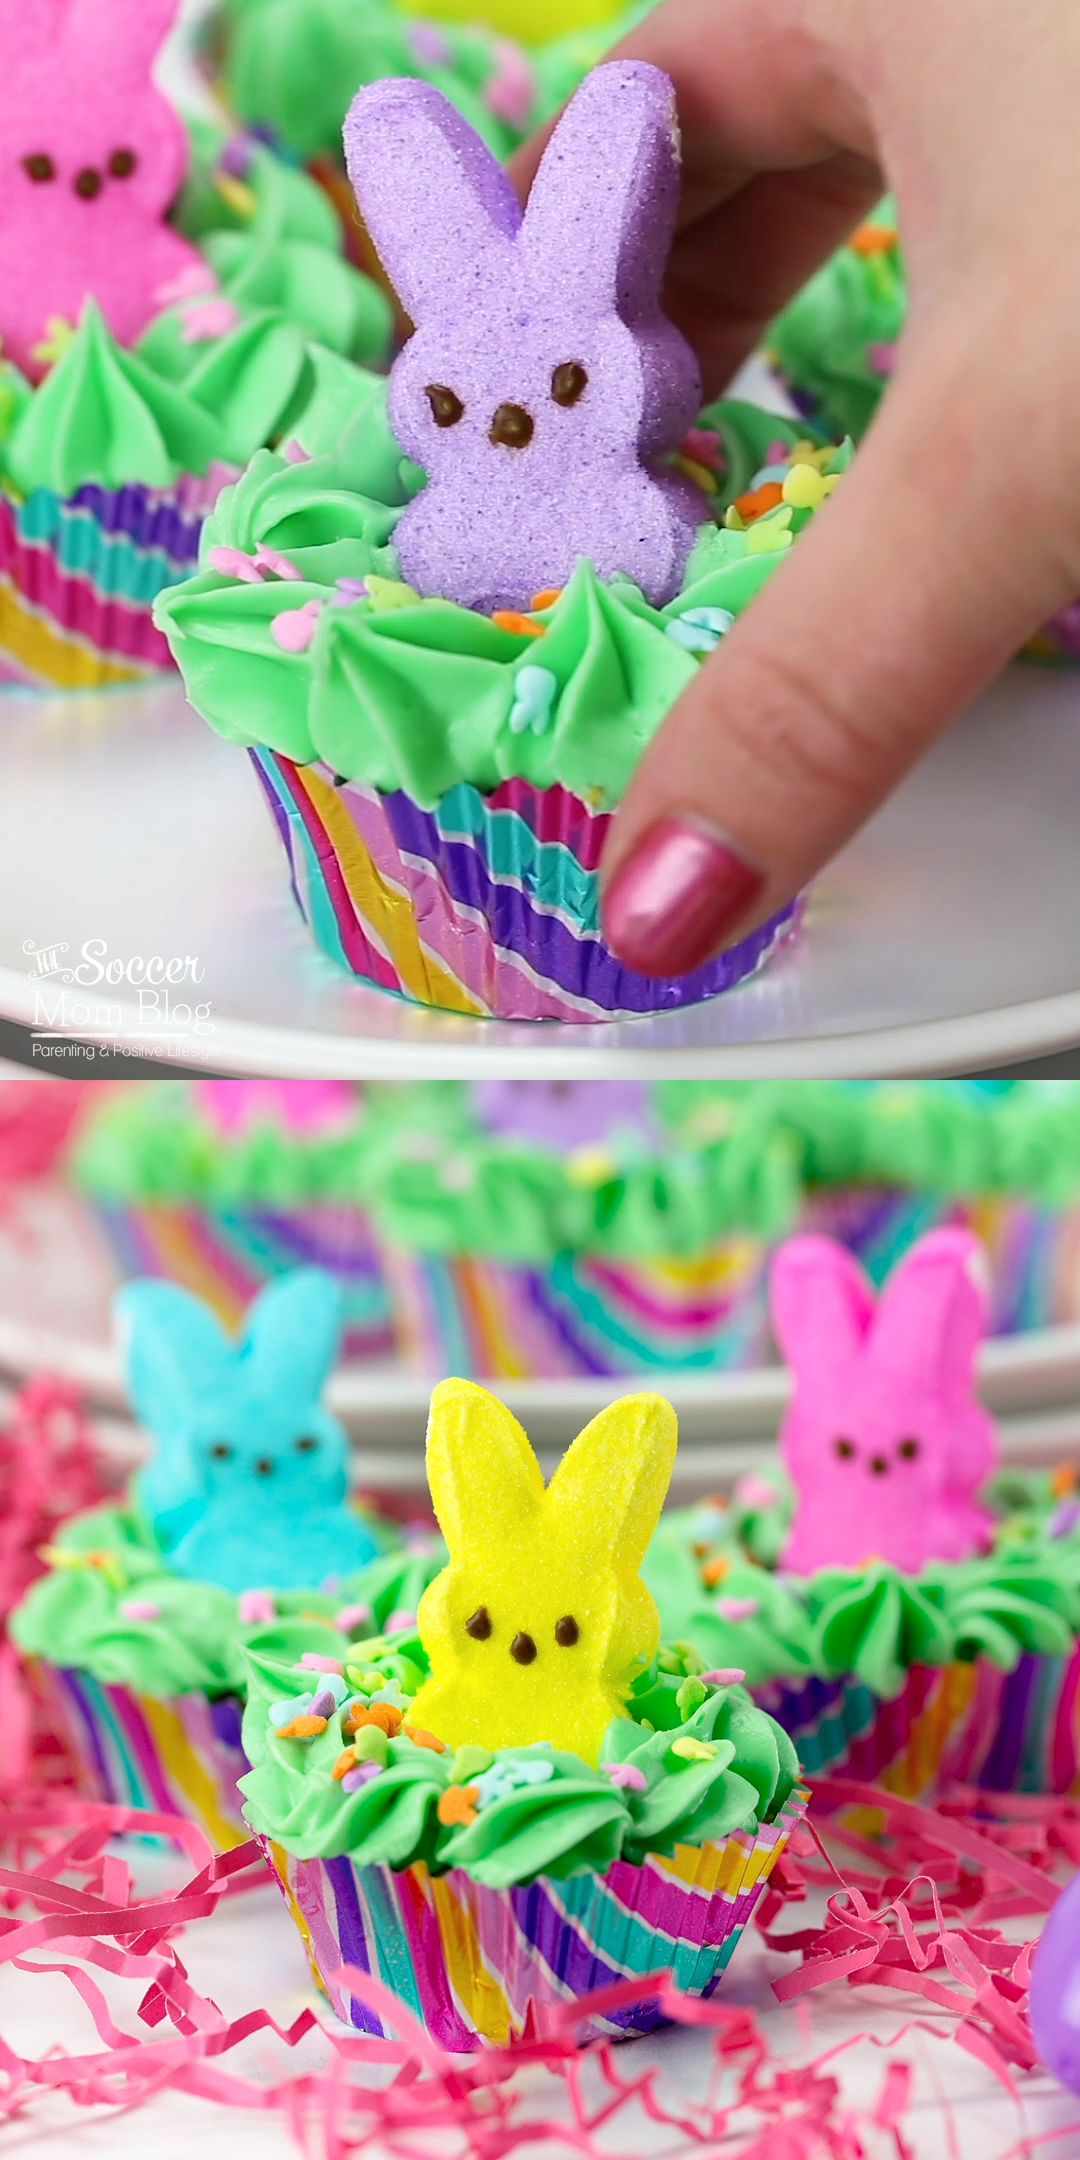 Peeps Easter Bunny Cupcakes рџђ°рџ§Ѓ -   17 cup cake Easter ideas